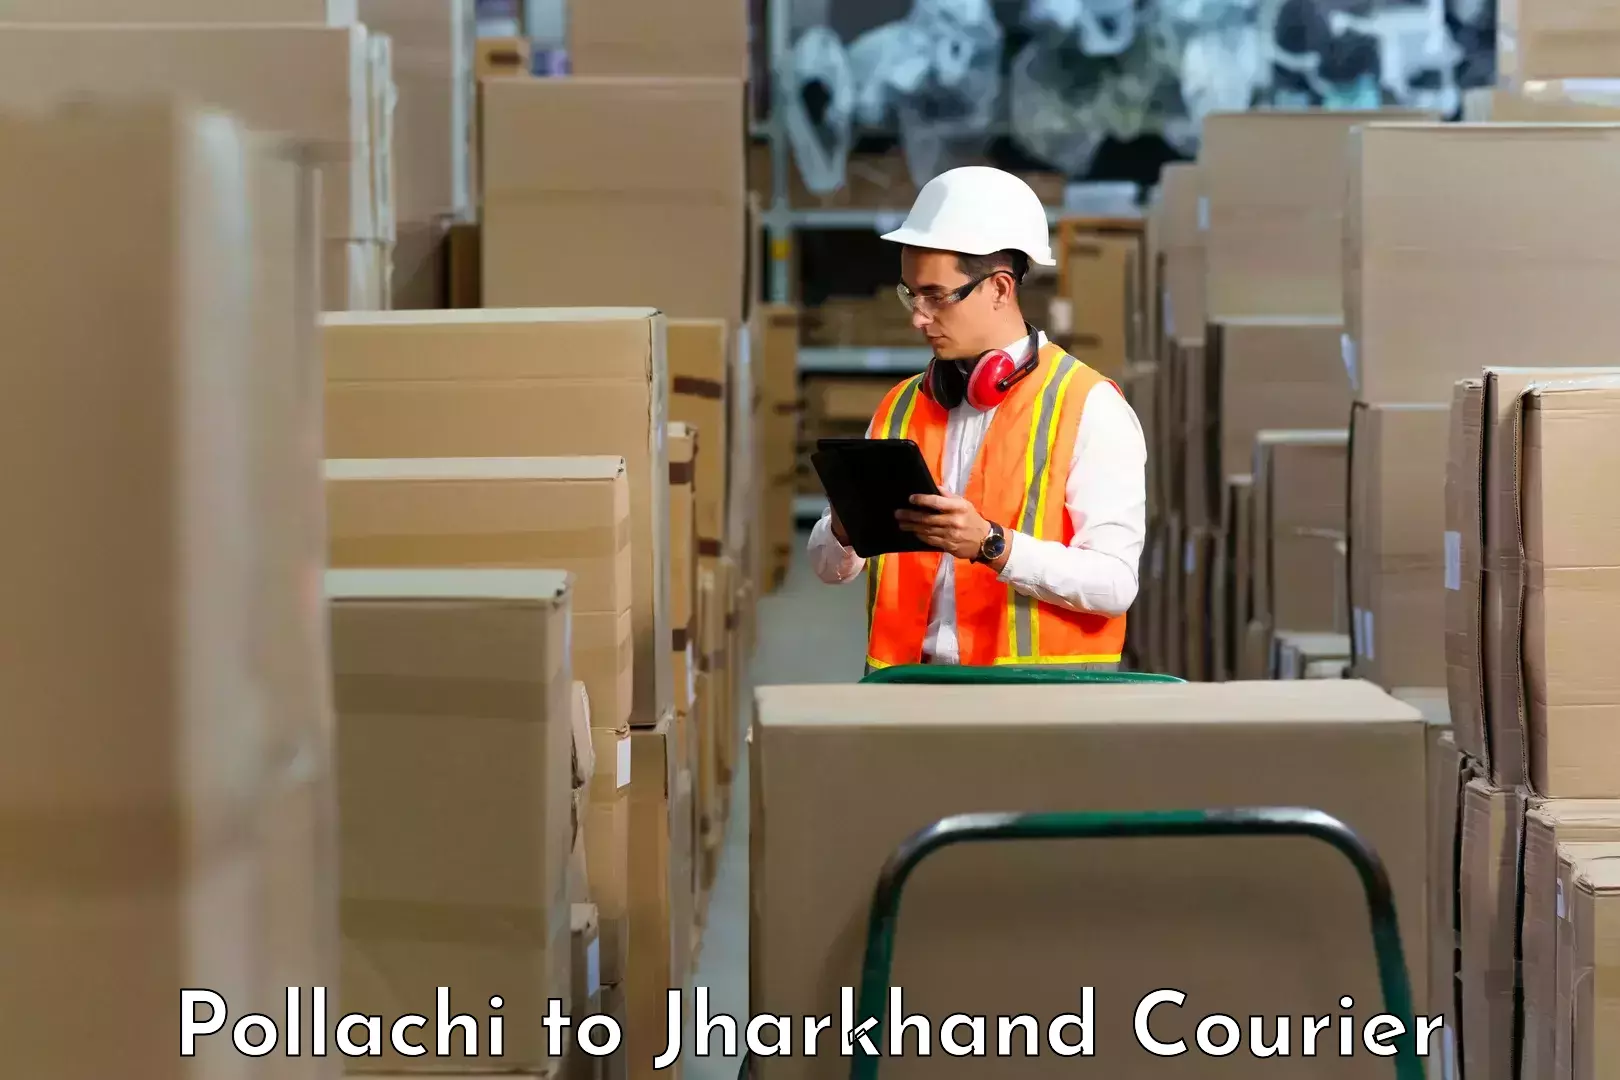 Affordable parcel service Pollachi to Barharwa